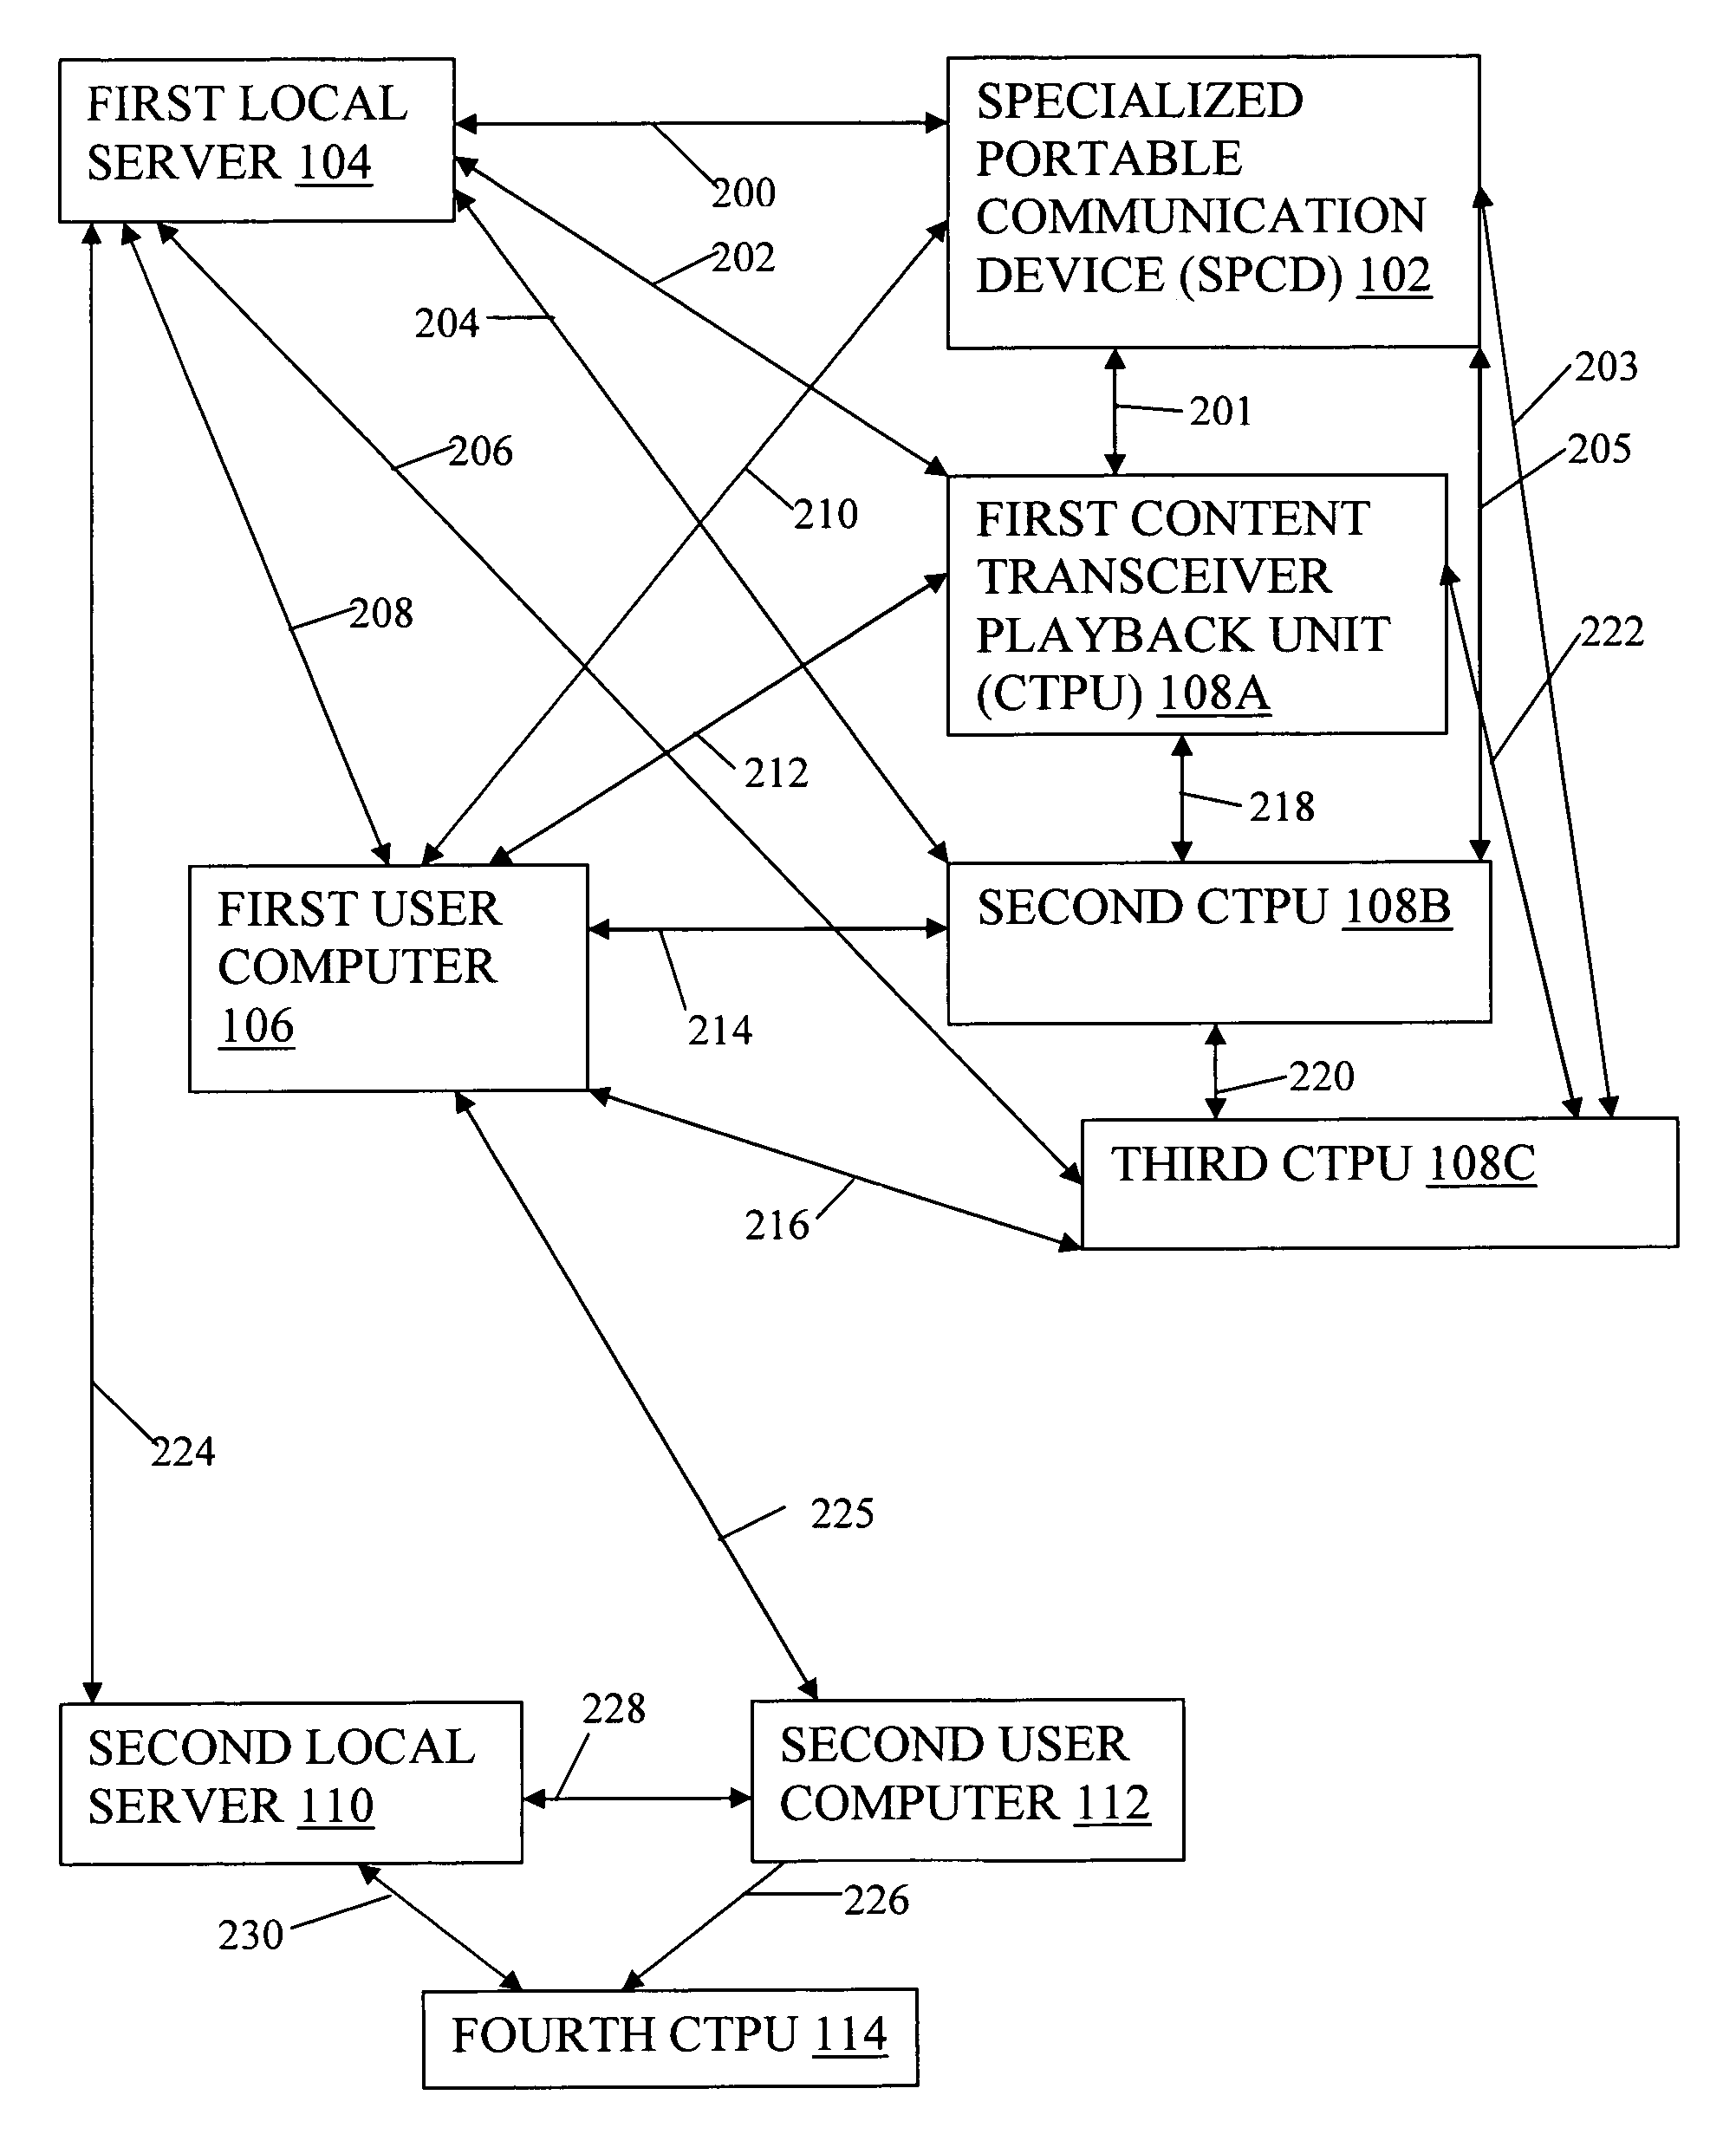 Apparatus for delivering music and information